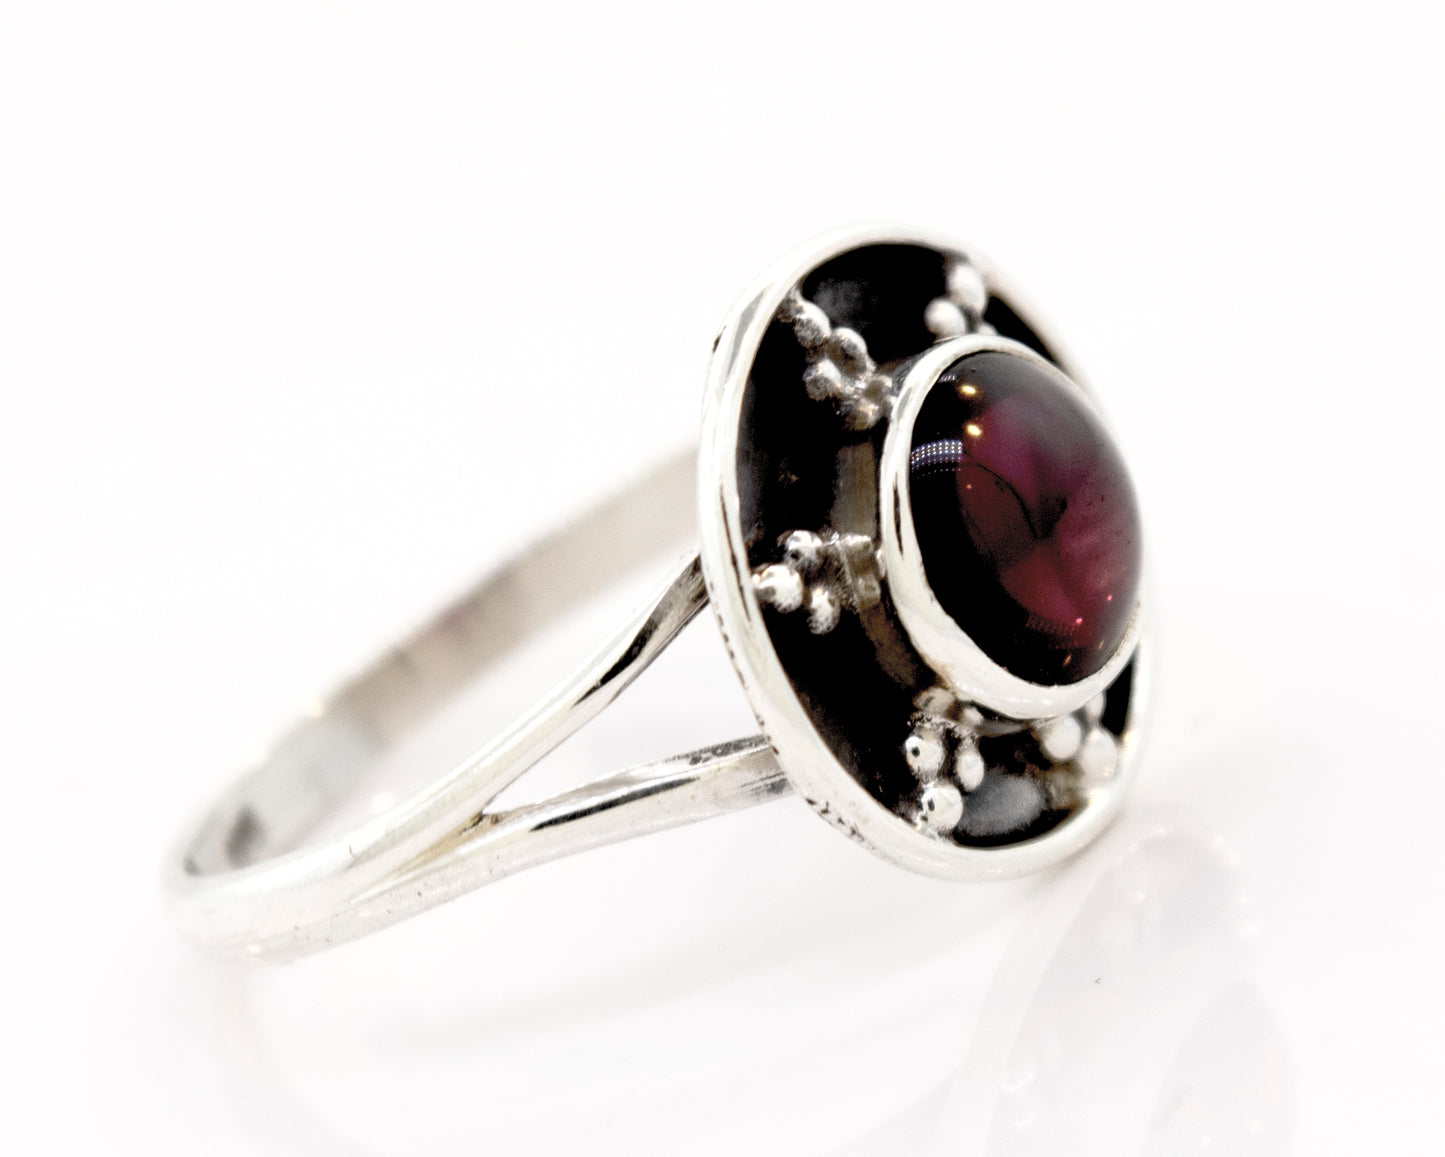 
                  
                    A **Gemstone Ring With Unique Oxidized Design** with a round, deep red gemstone set in the center, featuring small decorative silver beads around the stone. This exquisite piece of gemstone jewelry radiates elegance and timeless charm.
                  
                